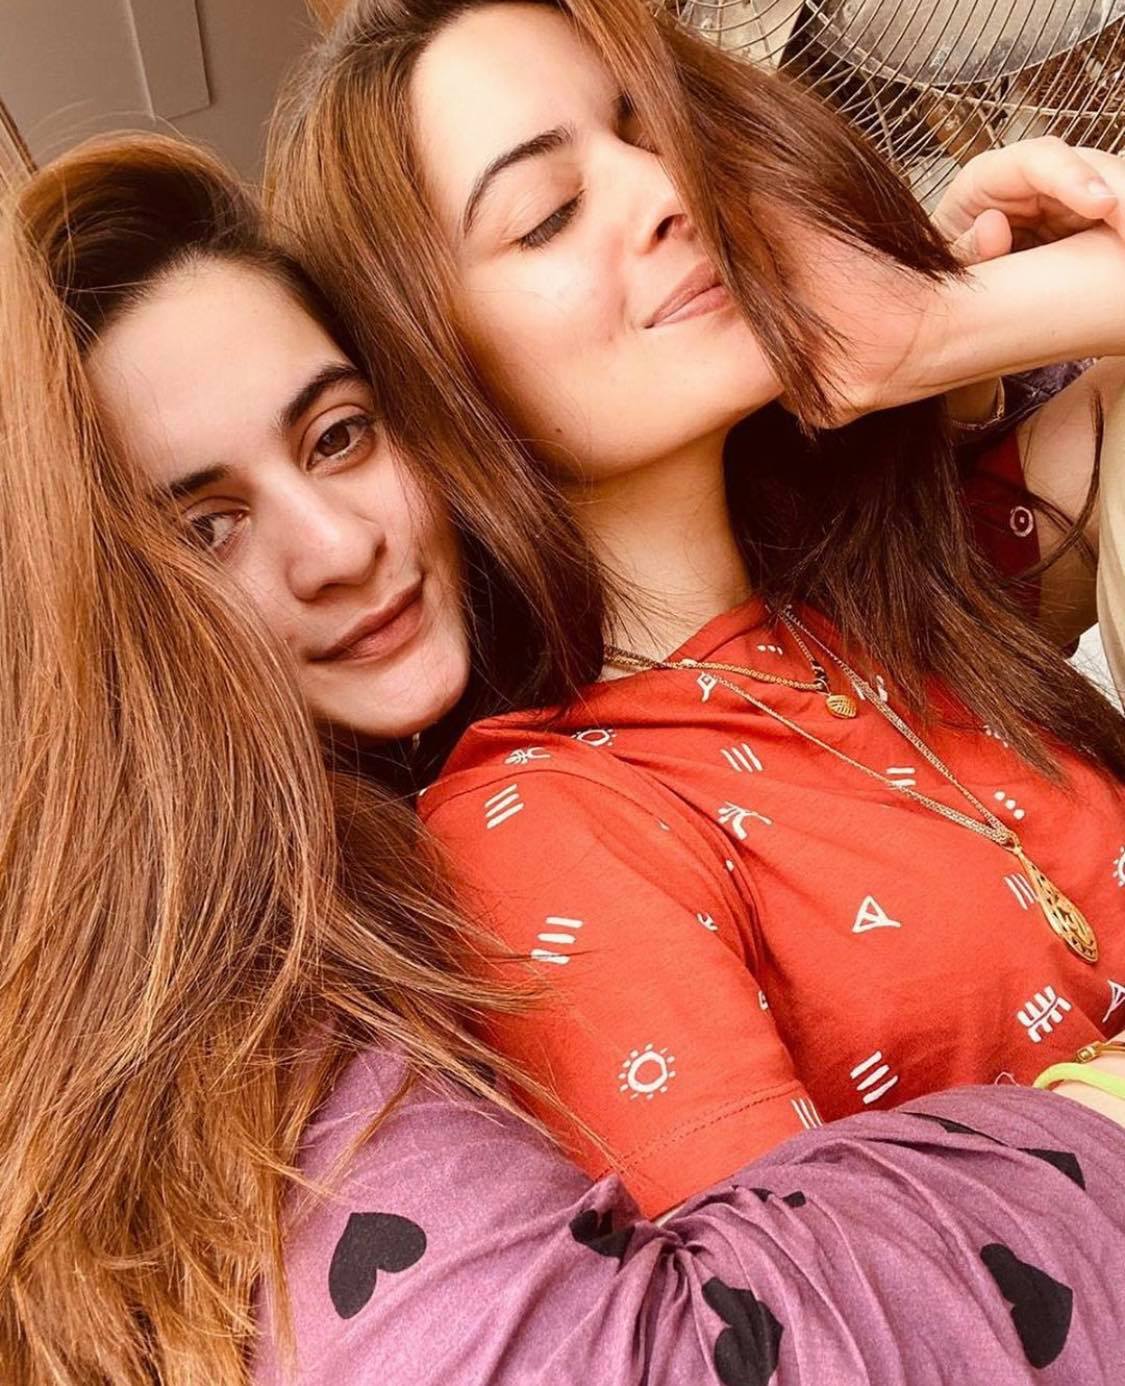 Aiman Khan Complete Information - Age, Instagram, Wedding, Pictures